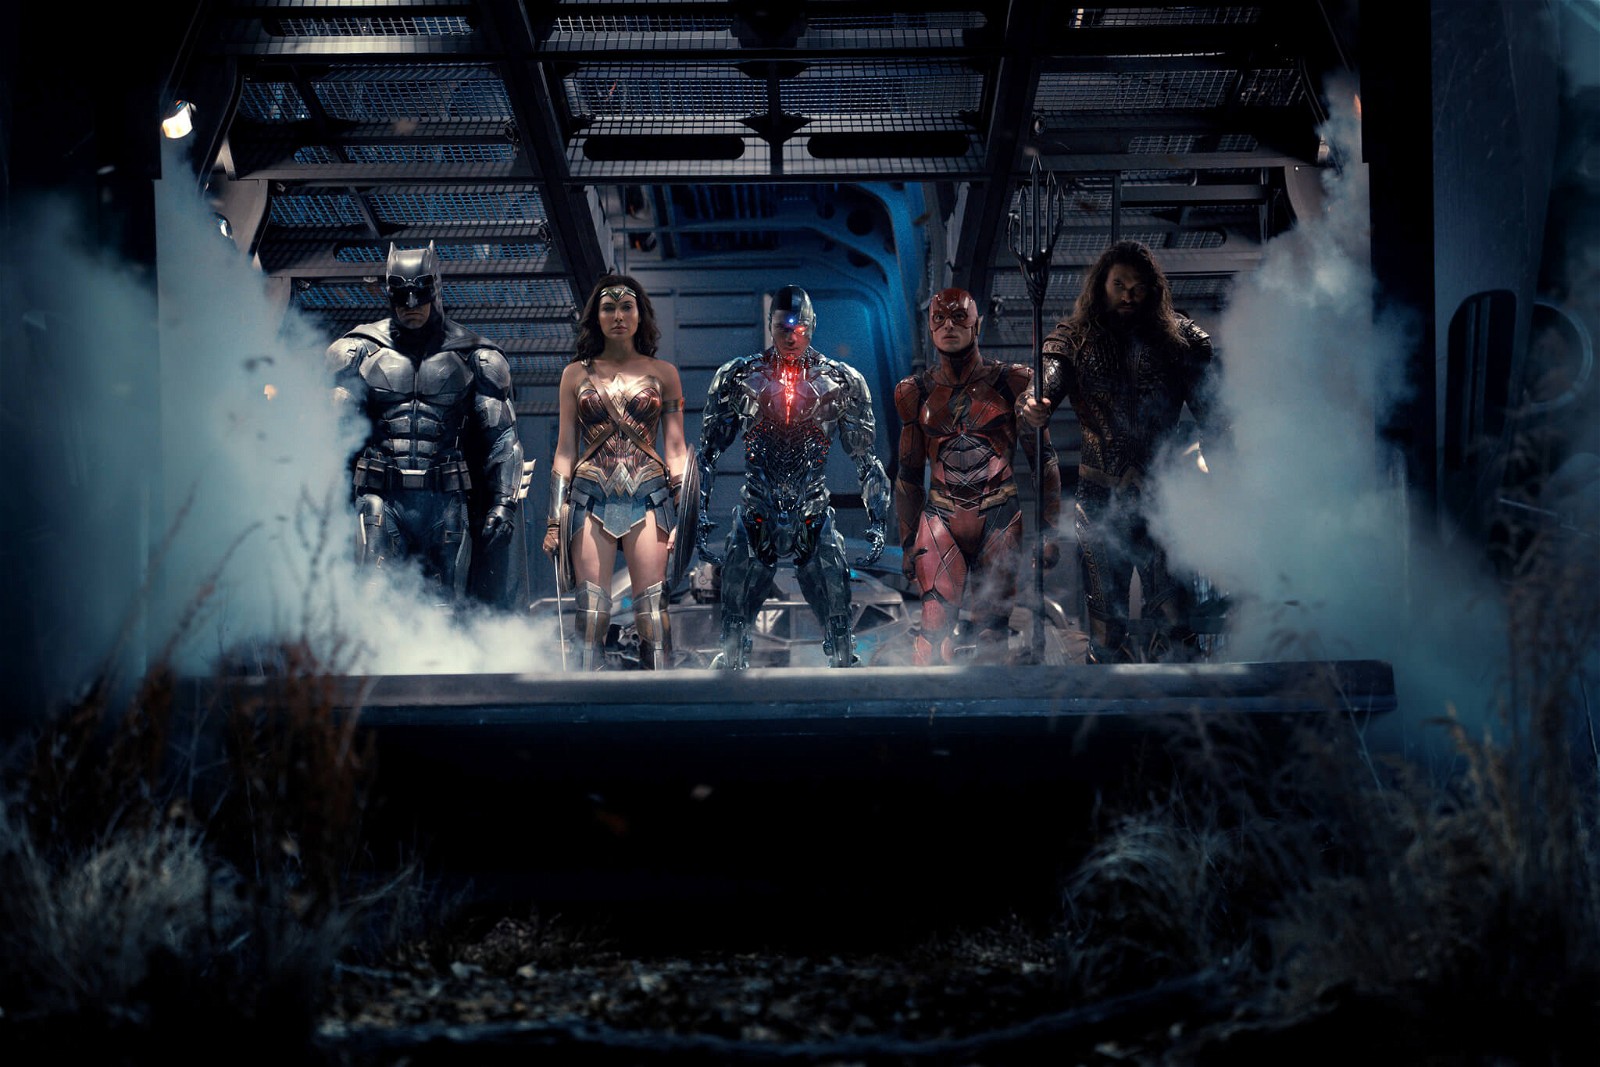 A still from The Justice League